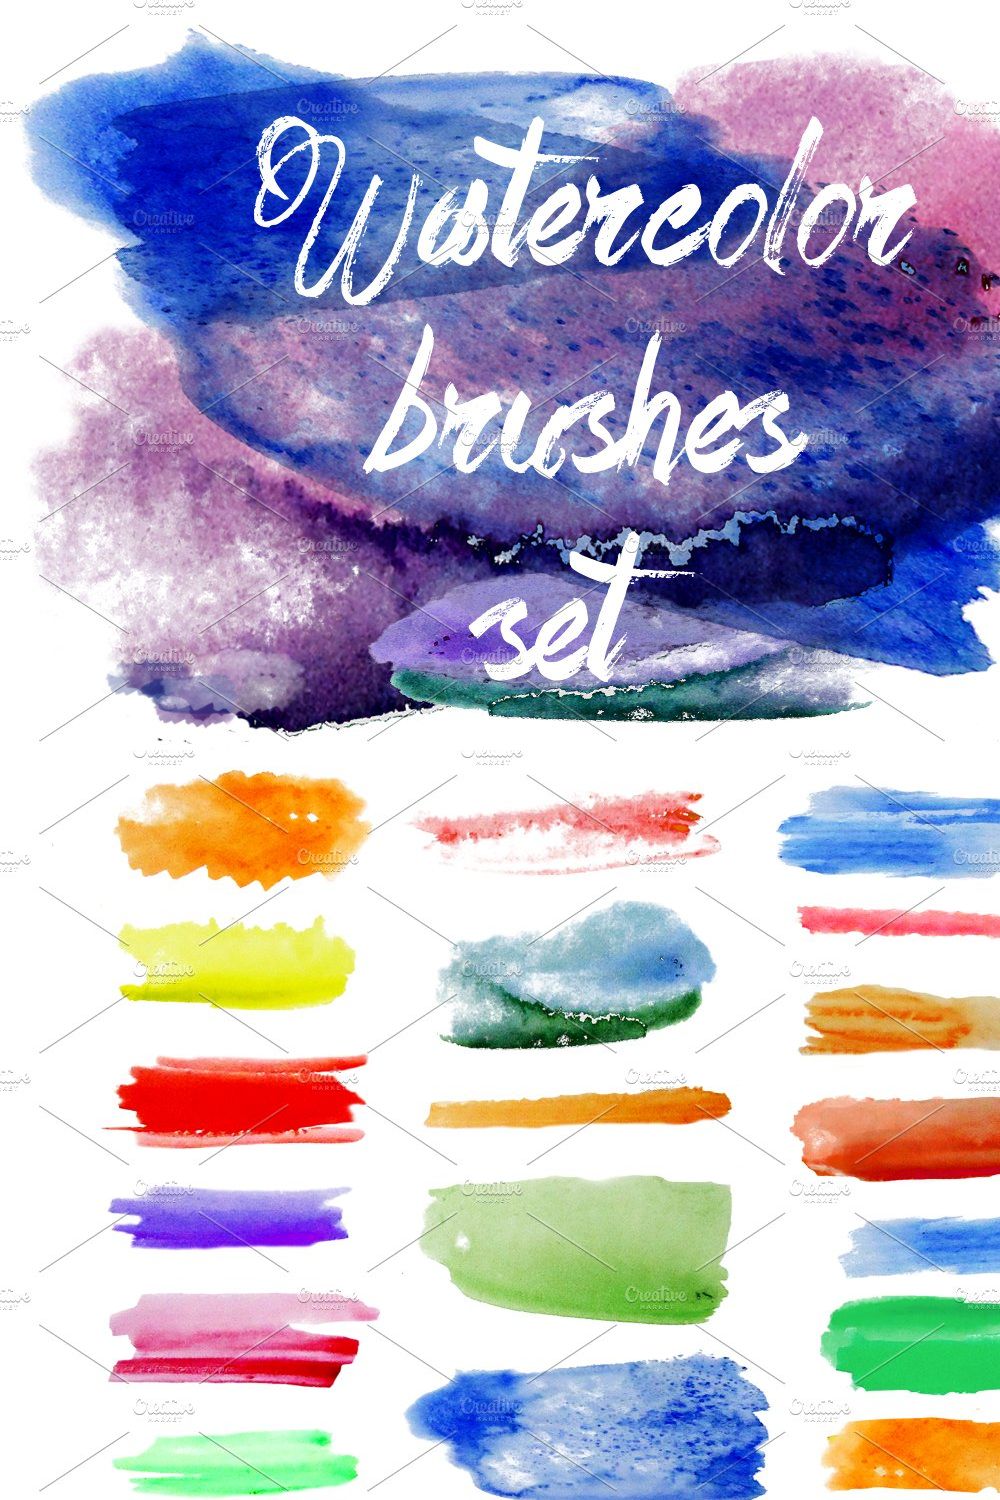 Watercolor brushes set. pinterest preview image.